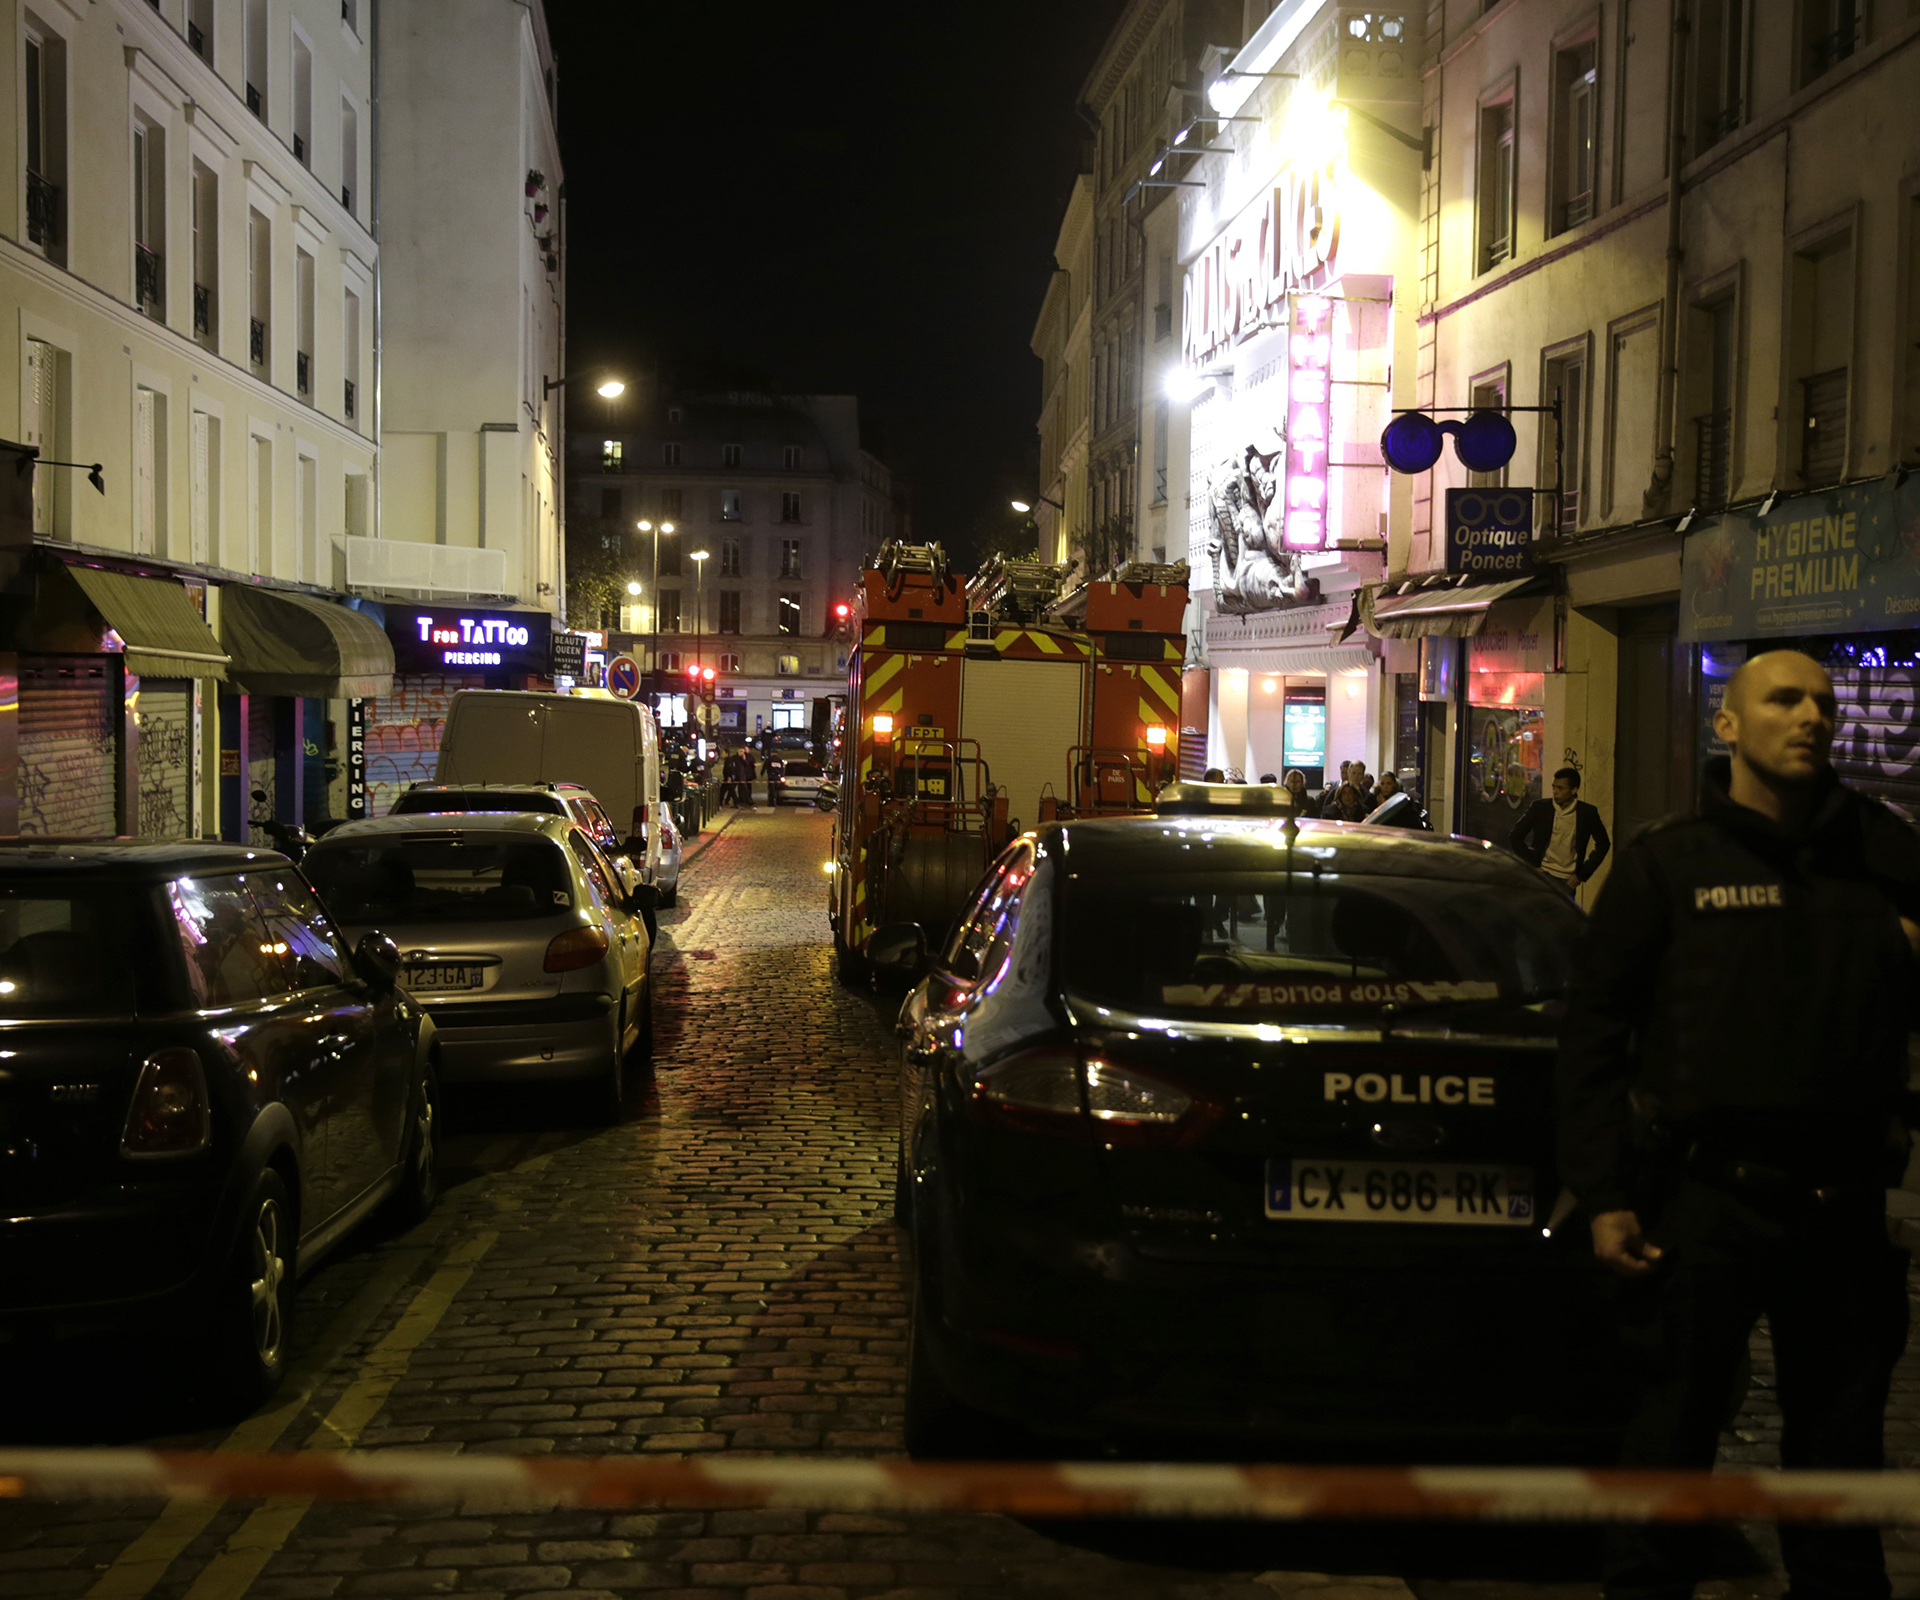 Dead Paris attacker ‘posed as a Syrian refugee’